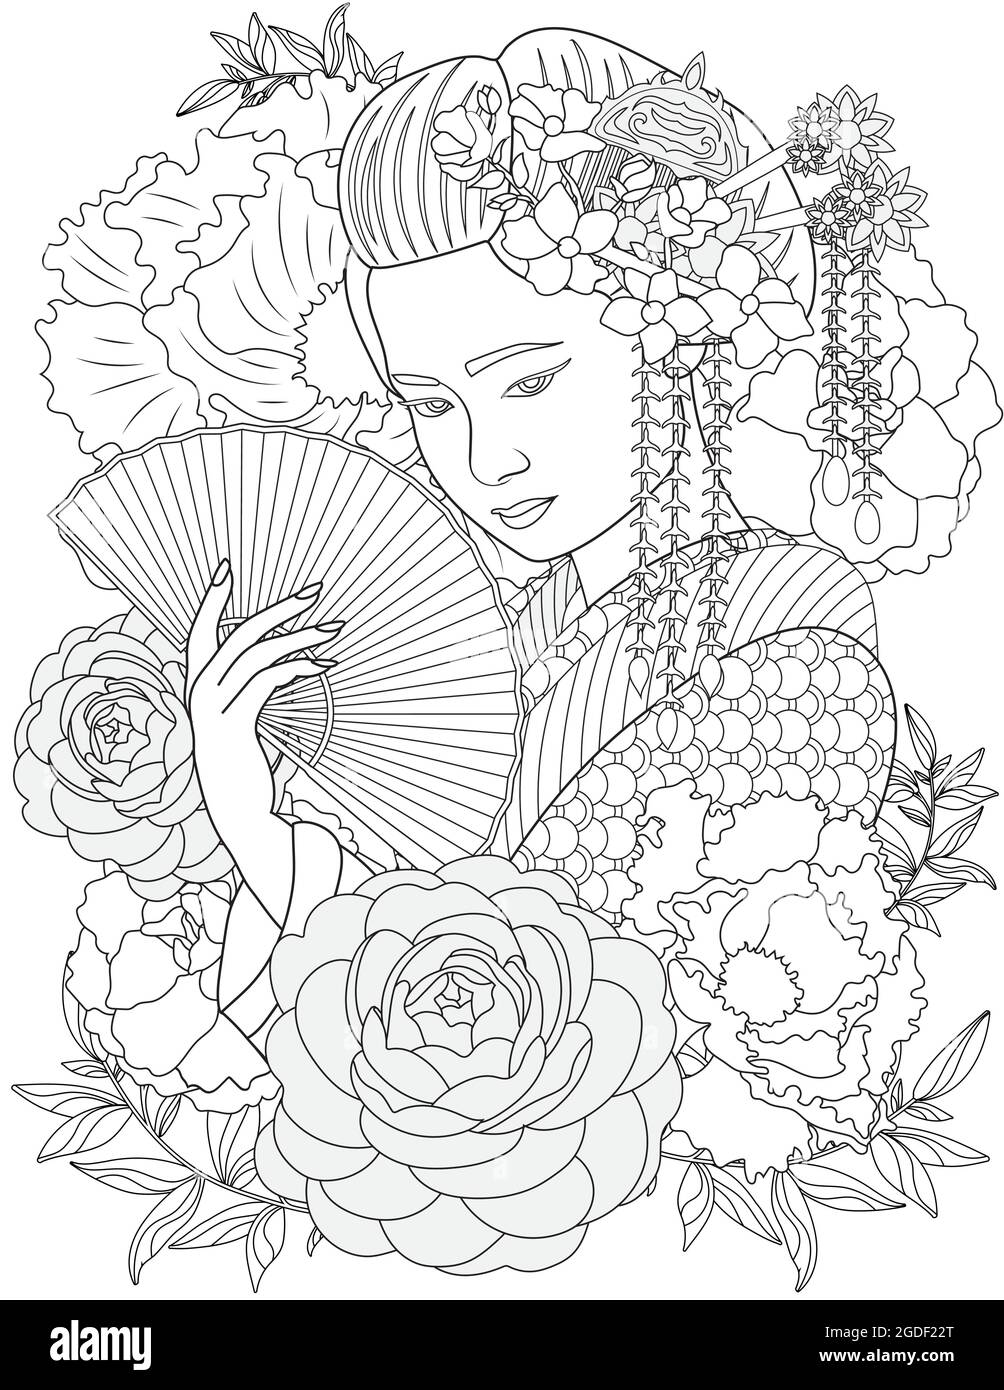 Hand Fan Coloring Page